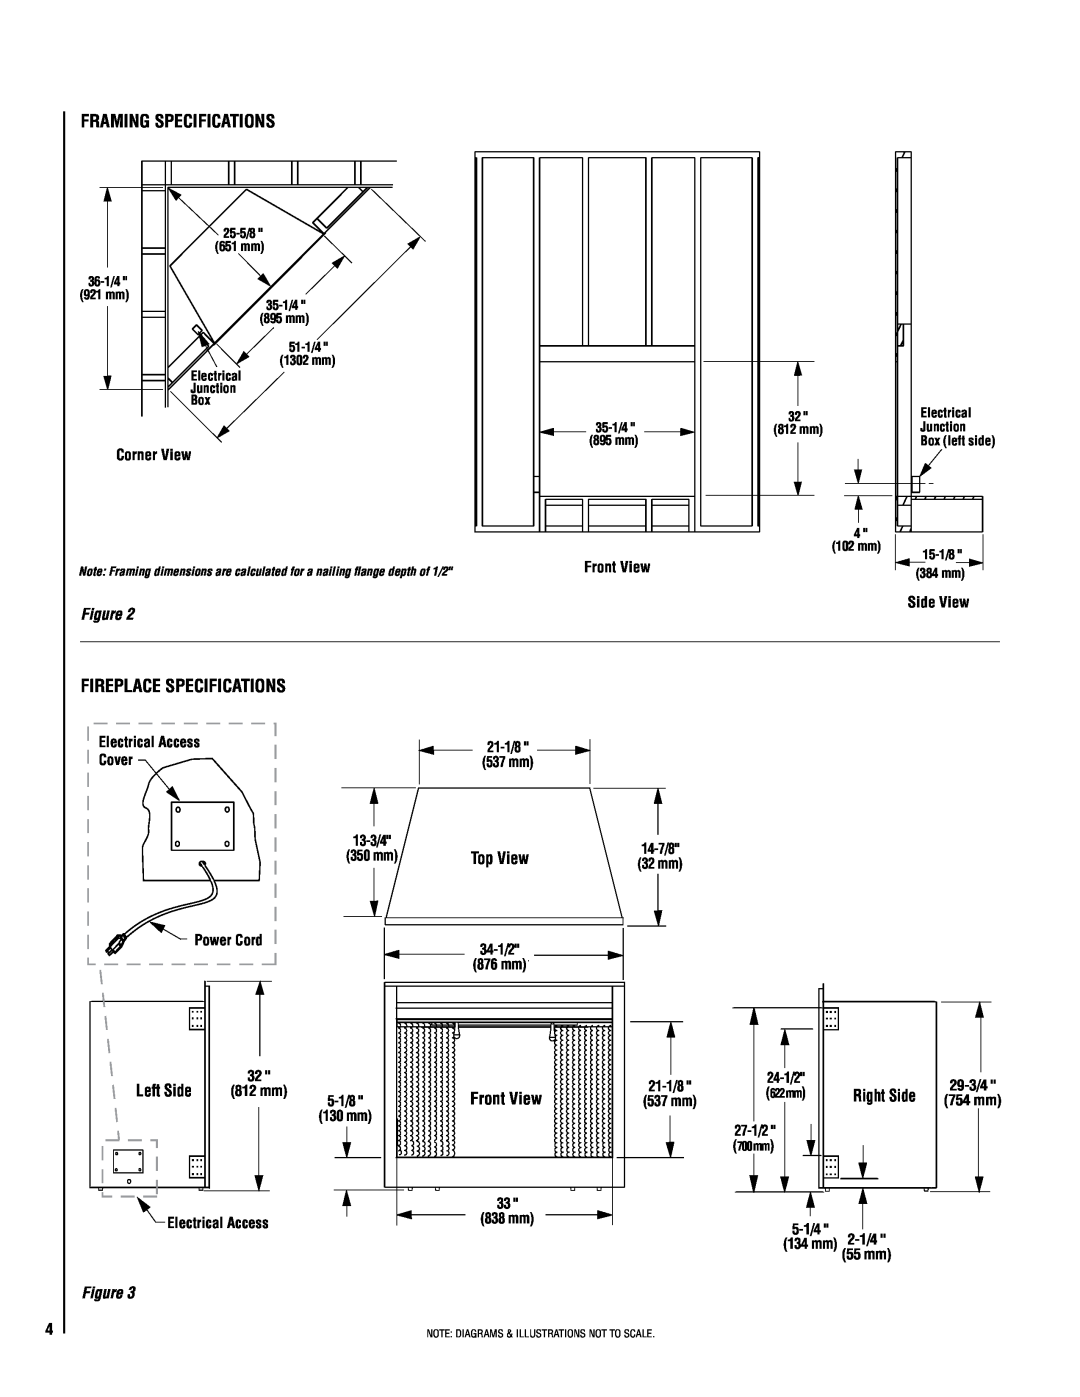 Lucent Technologies MPE-33R Framing Specifications, Fireplace specifications, Left Side, Top View, Front View, Corner View 